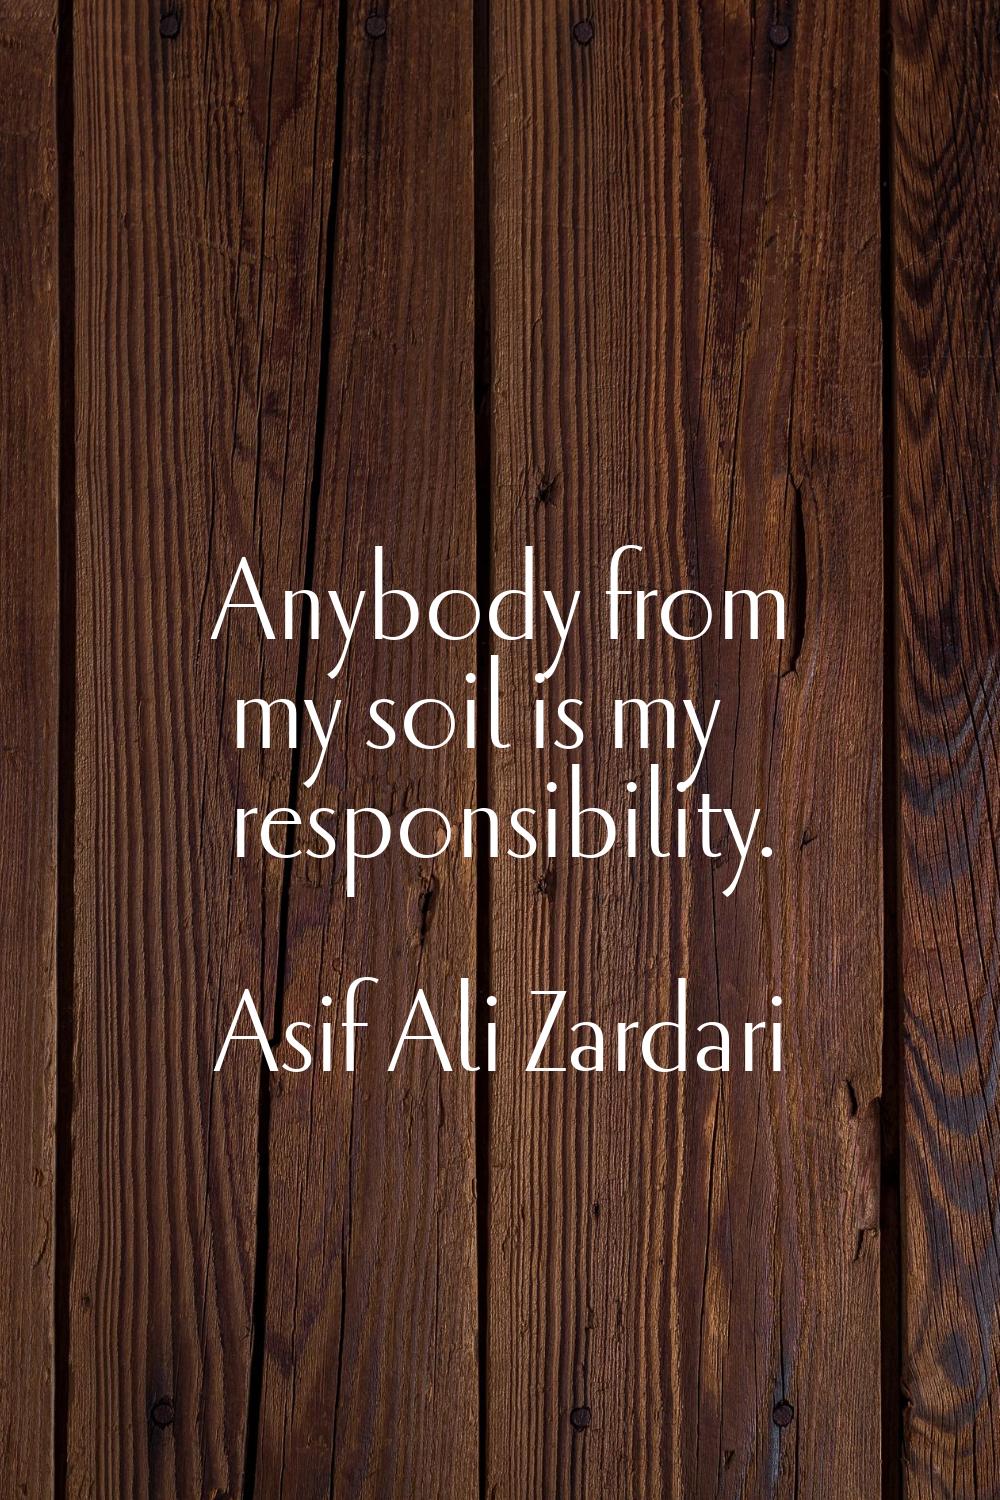 Anybody from my soil is my responsibility.